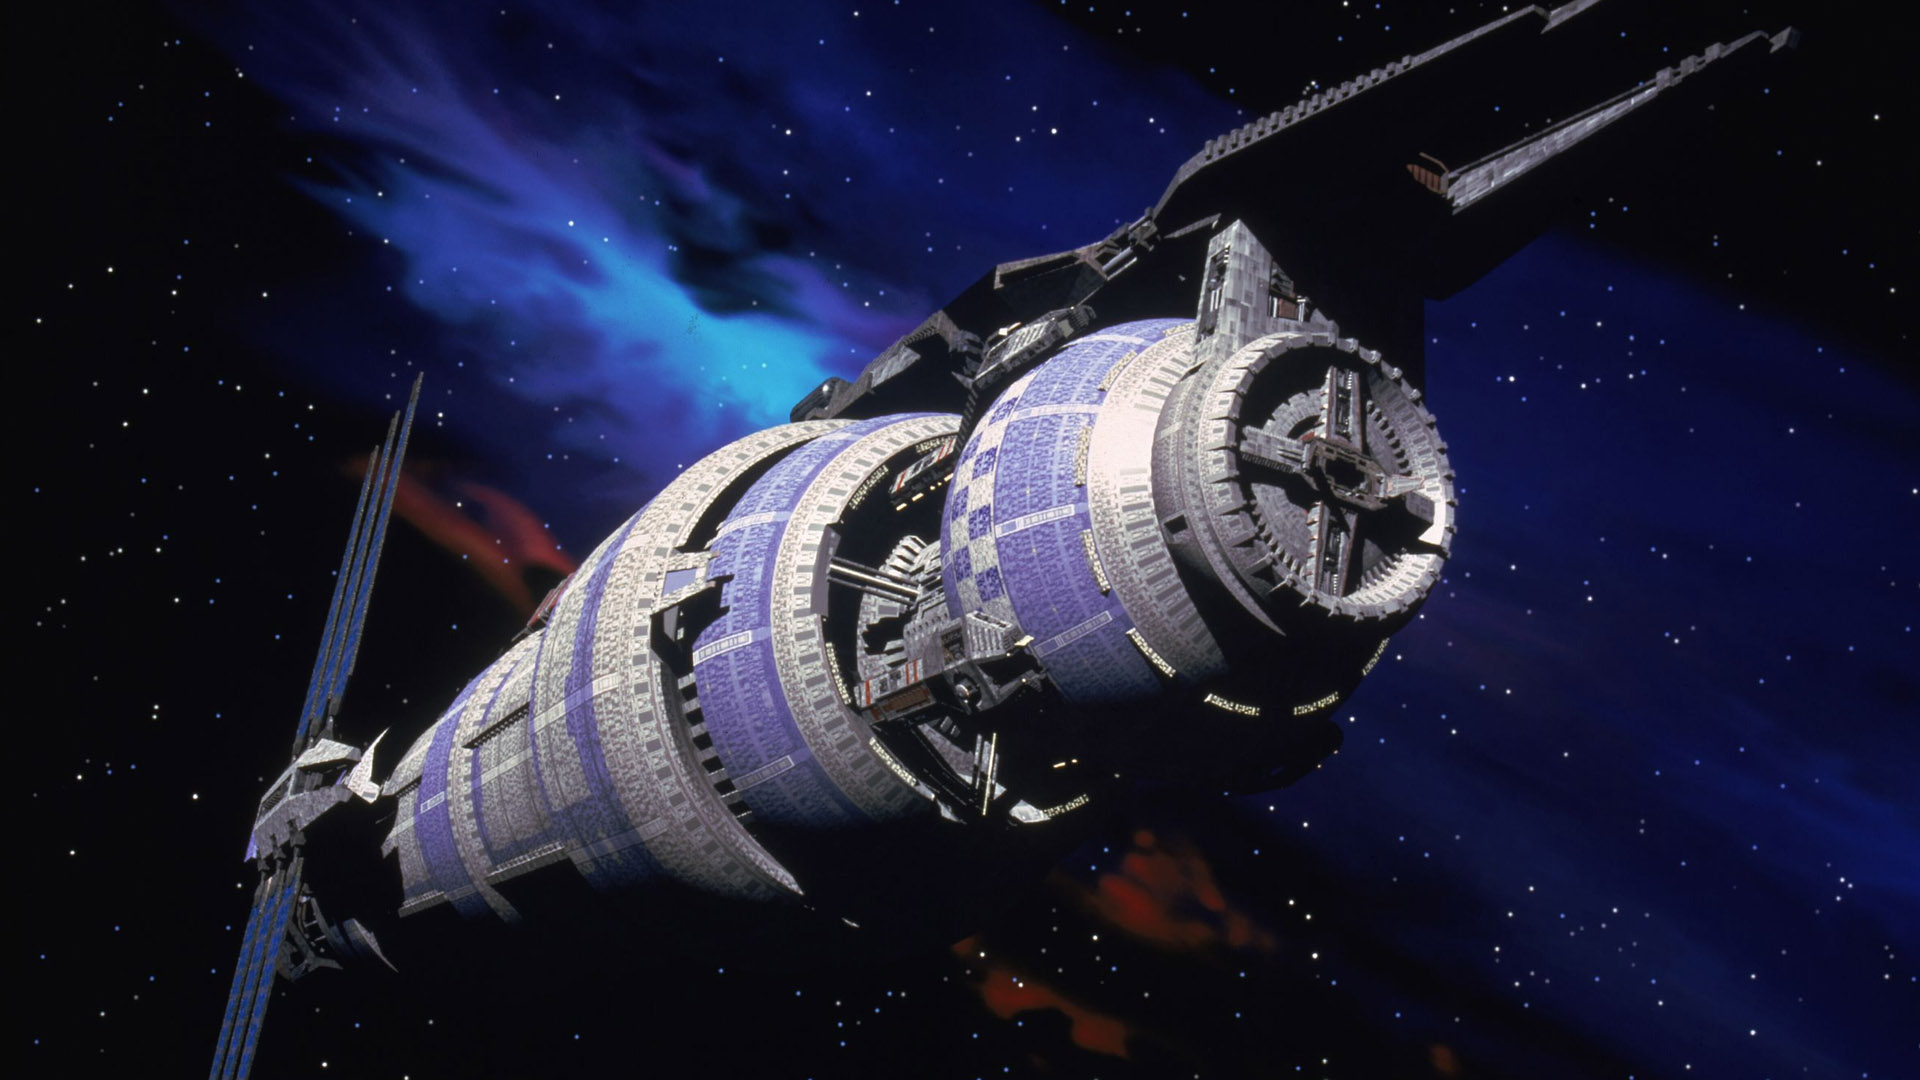 Babylon 5, Space 1999, & Chips Are Coming to Comet/Charge TV